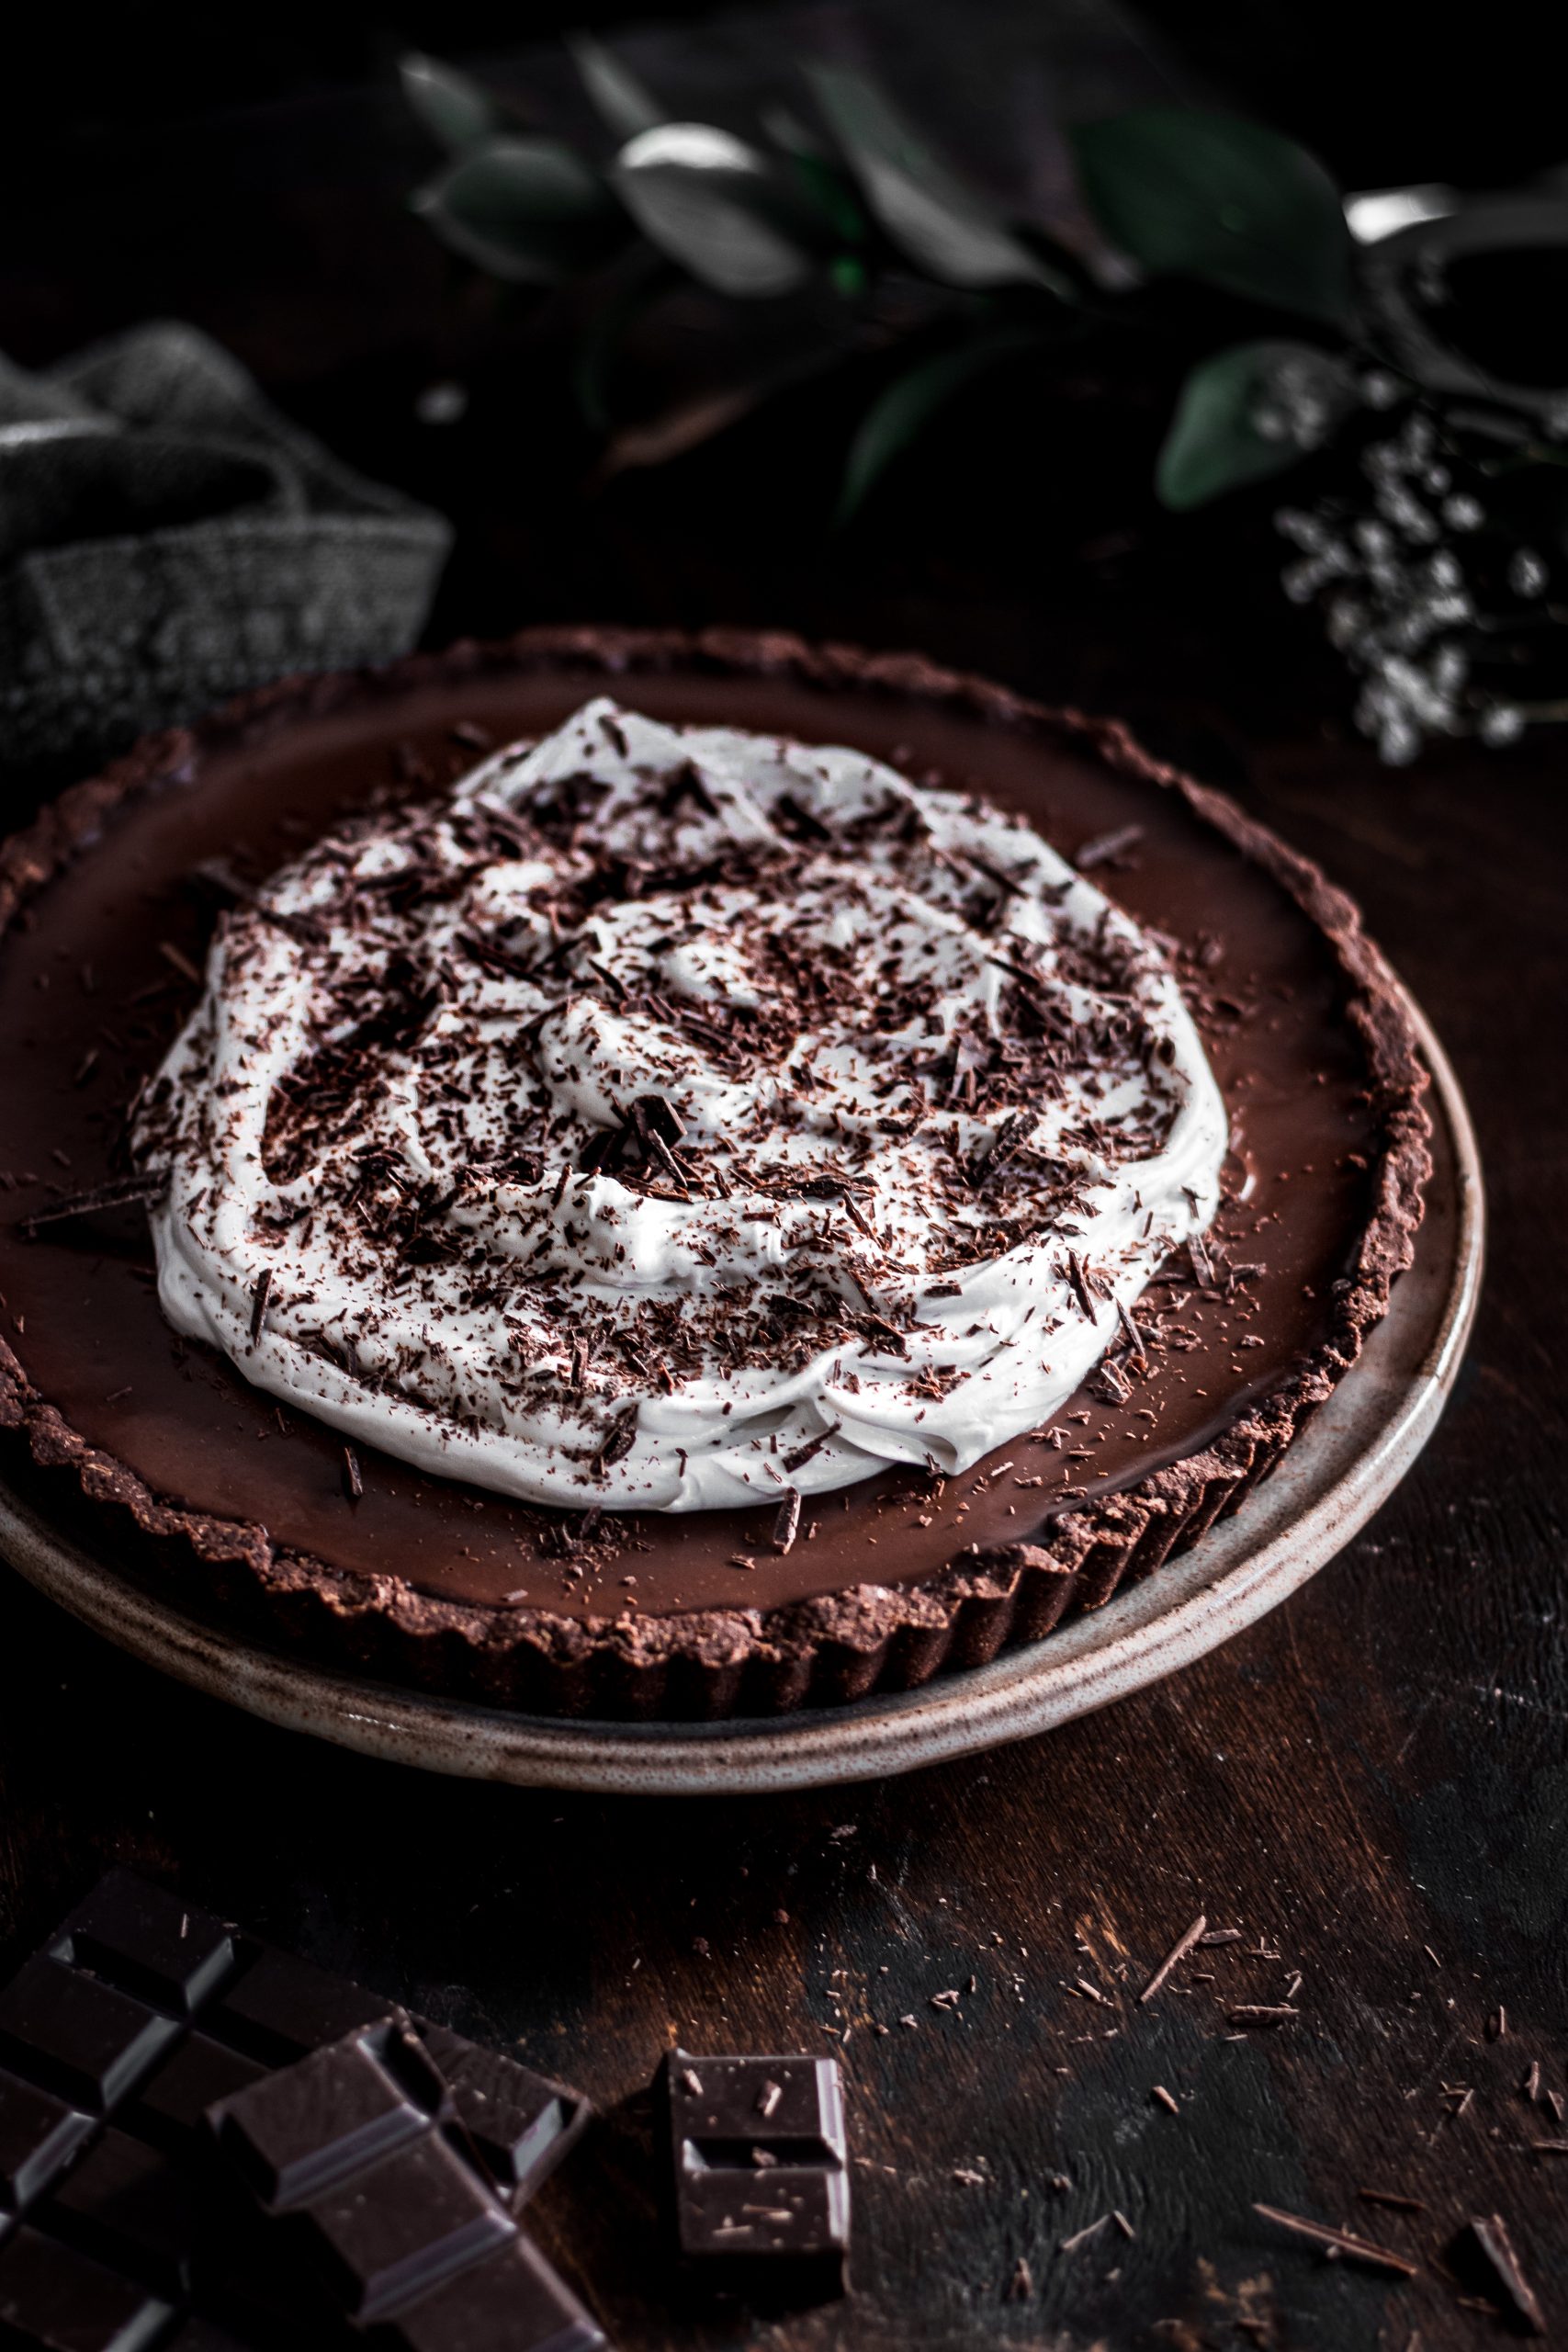 Chocolate Espresso Tart garnished with coconut whipped cream.